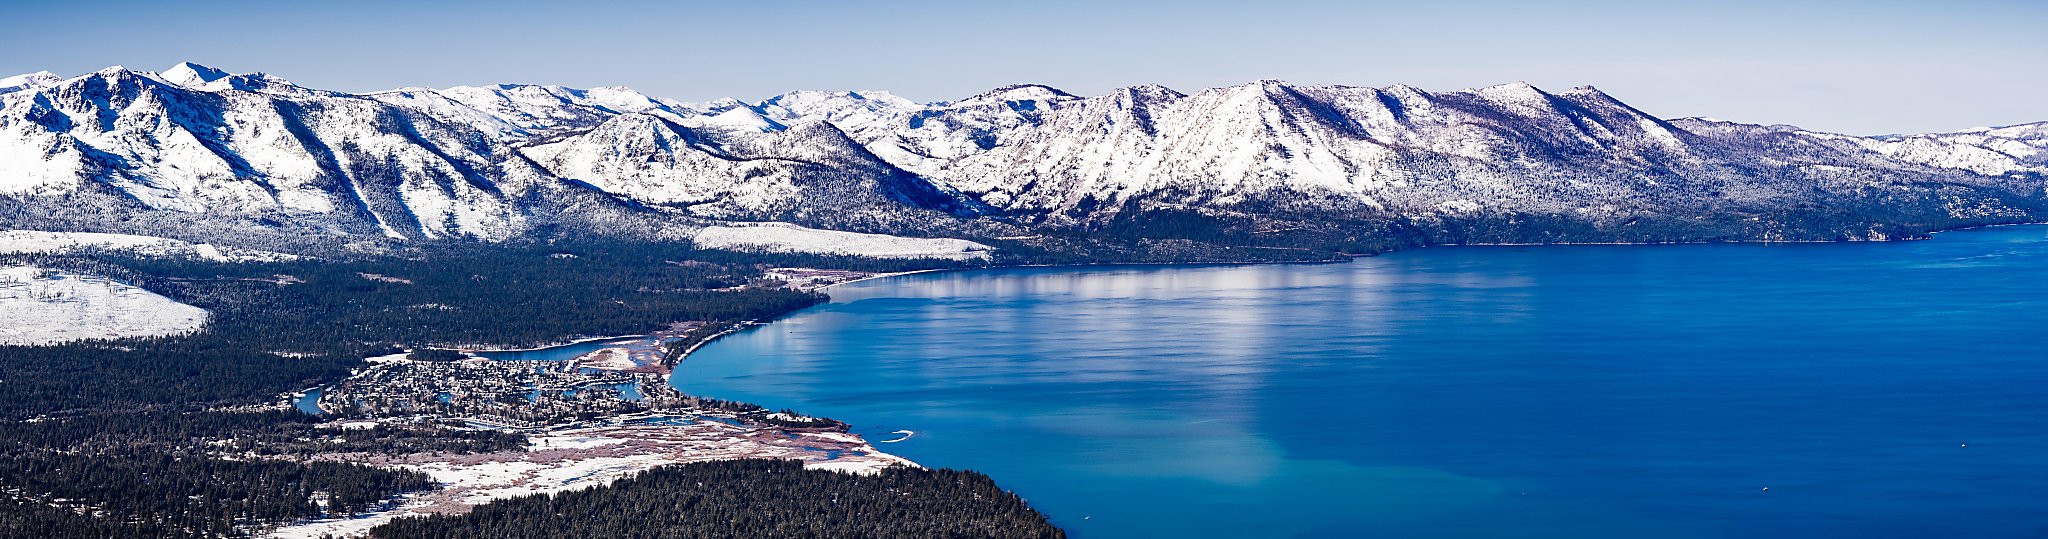 How an ‘unripe snowpack’ will impact Lake Tahoe this summer